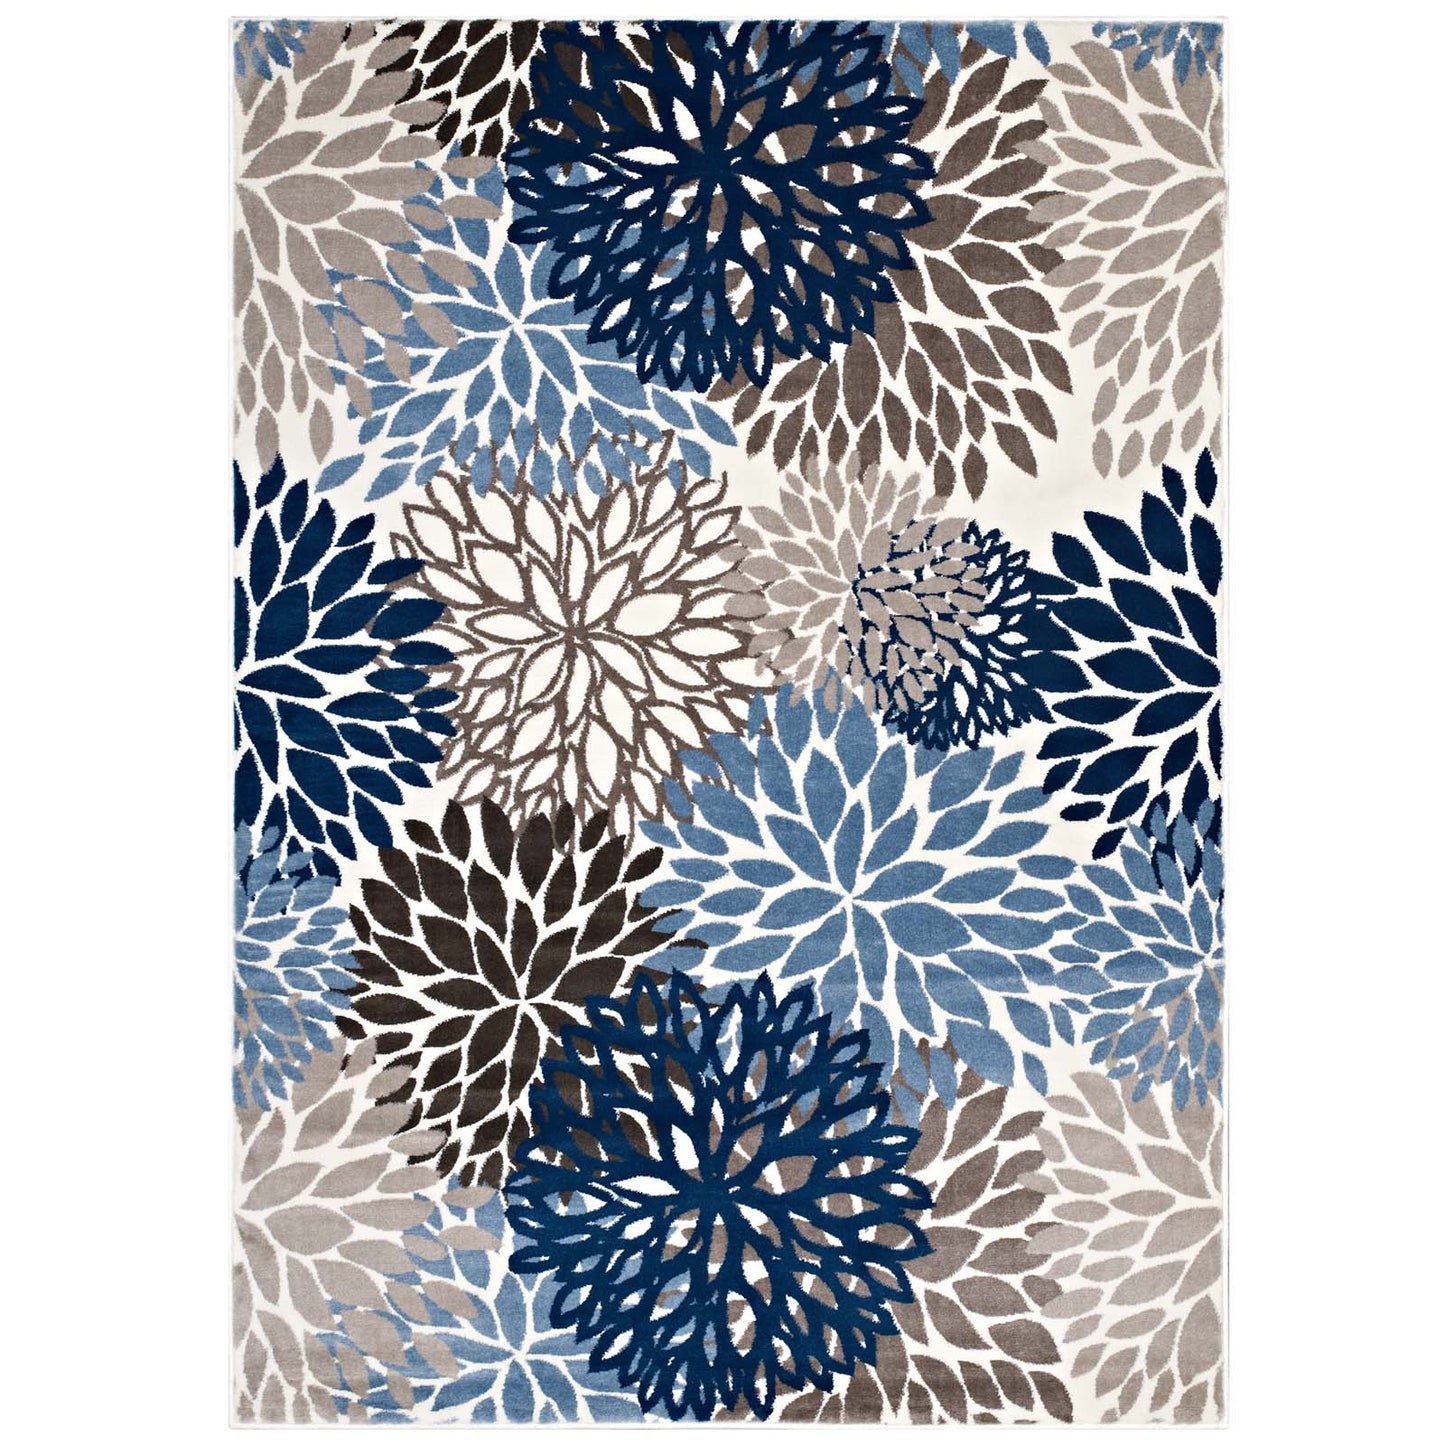 Calithea Vintage Classic Abstract Floral 5x8  Area Rug Blue, Brown and Beige R-1133A-58